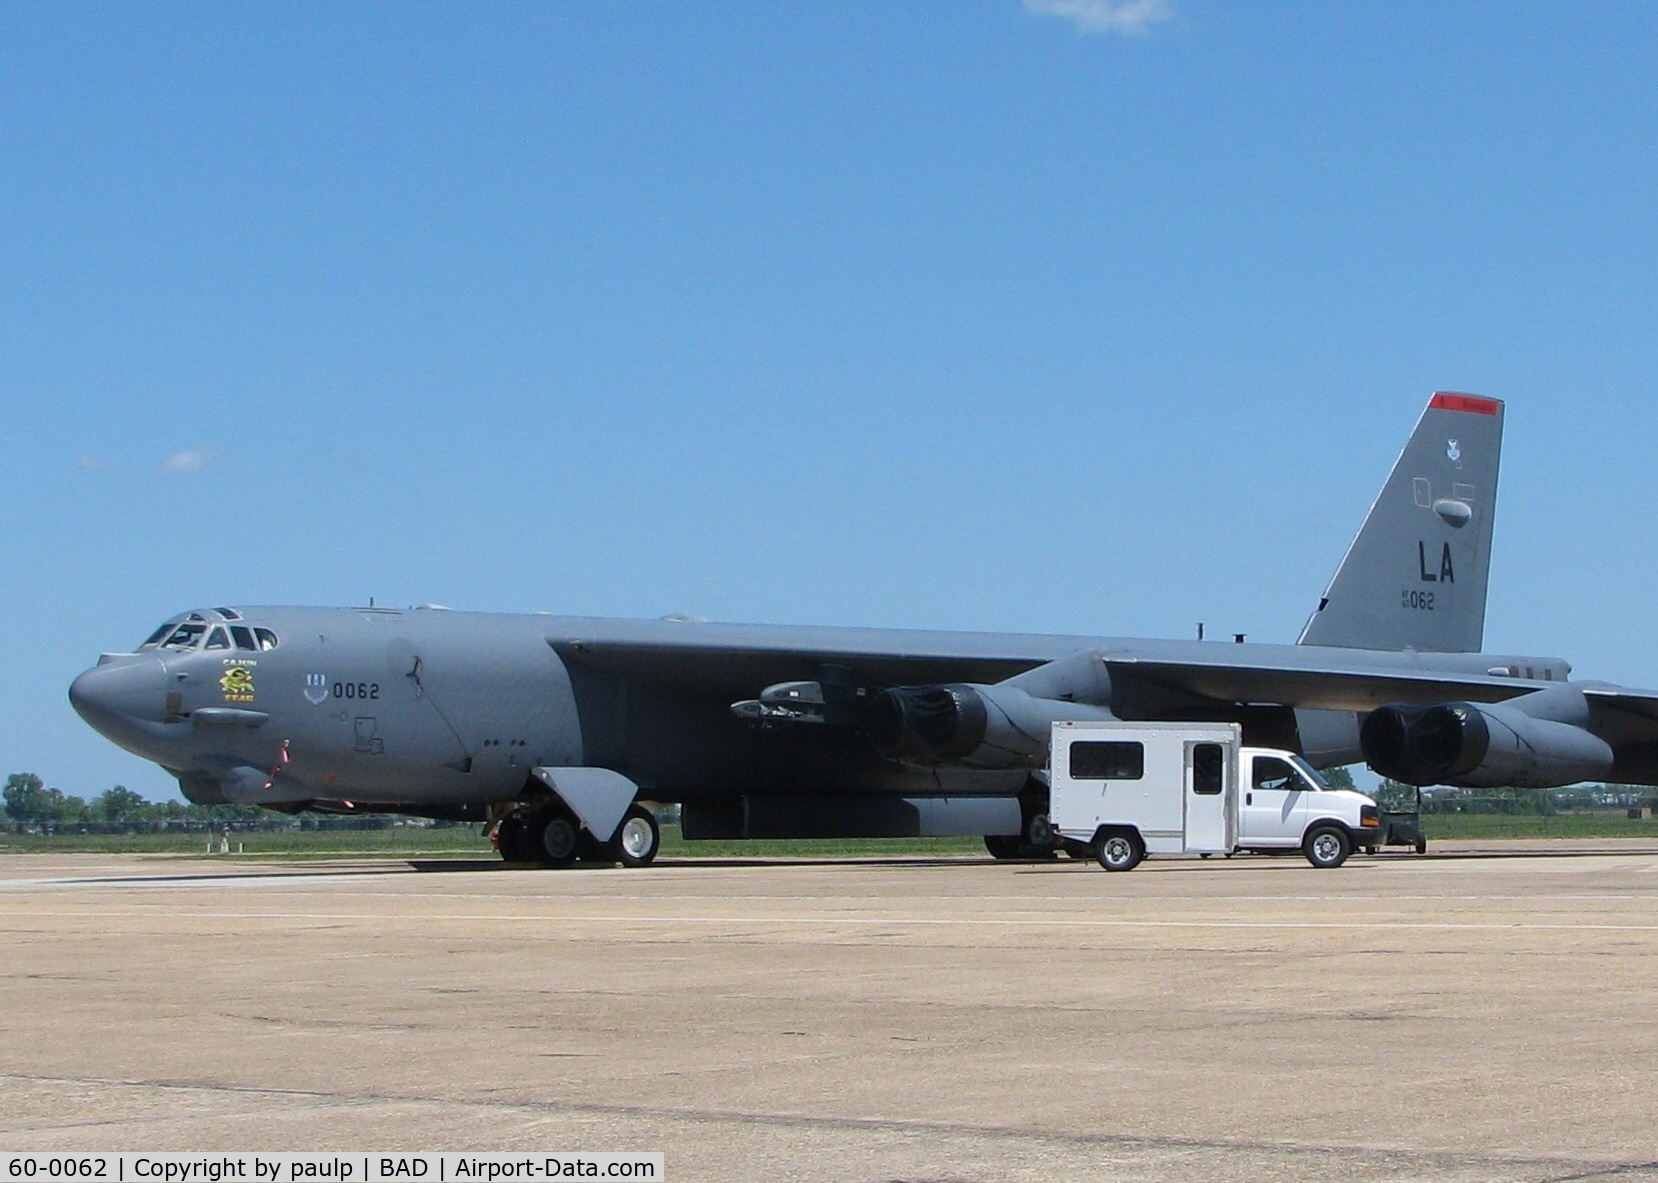 60-0062, 1960 Boeing B-52H Stratofortress C/N 464427, At Barksdale Air Force Base.